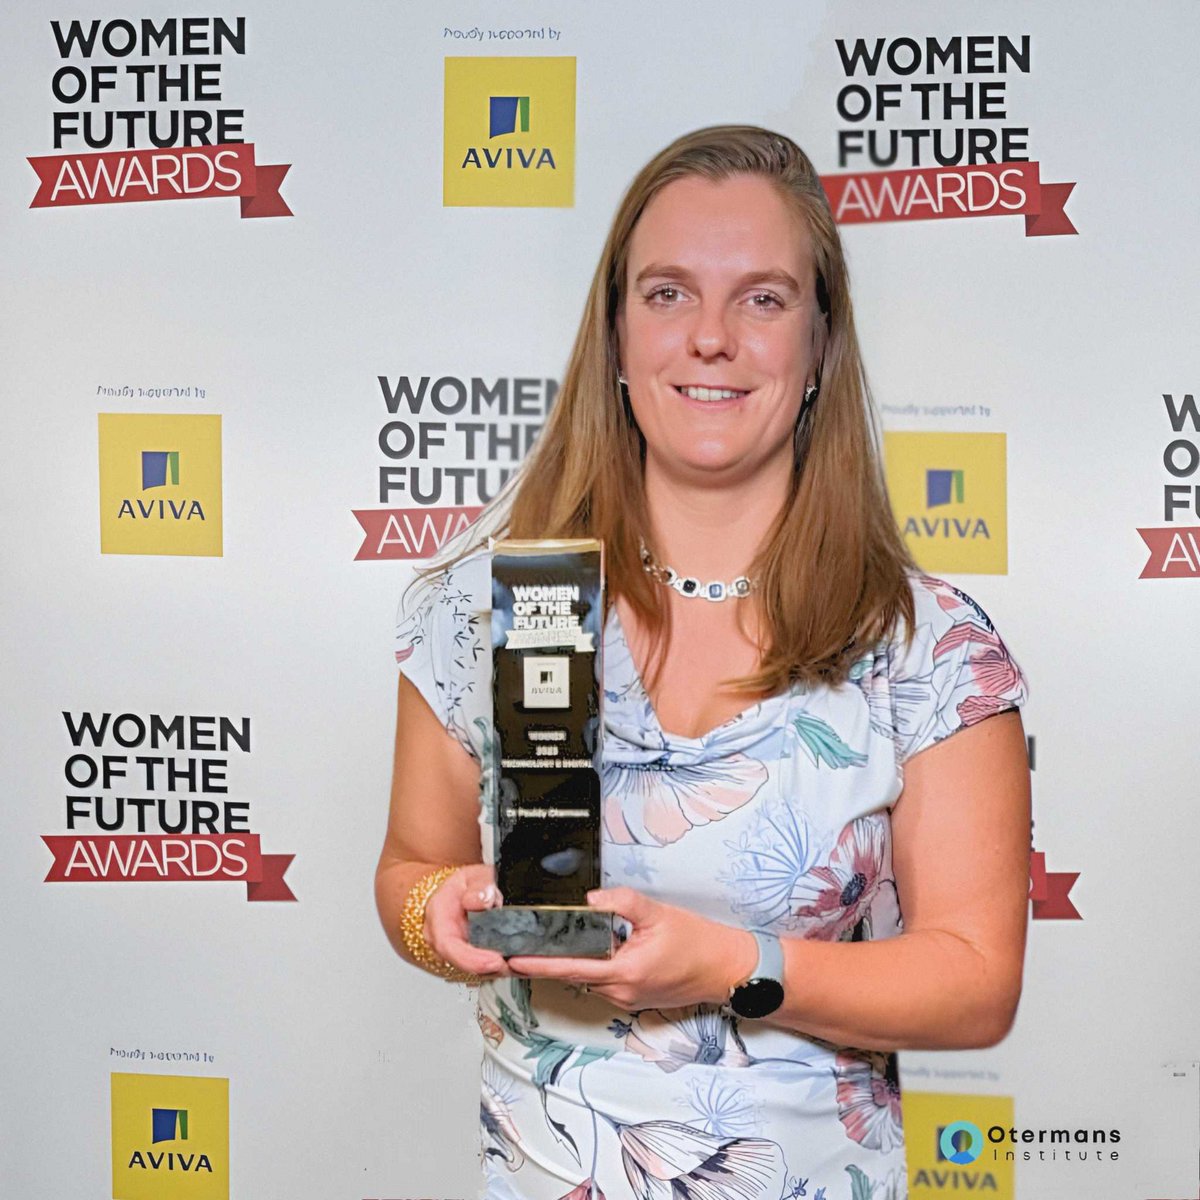 Congrats @PauldyOtermans for winning the prestigious Digital and Technology Award from the @womenoffuture! Let us also extend our congratulations to all the brilliant finalists!
#upskillingageneration #WOF2023 #innovation #education #aitechnology #digital #Awards